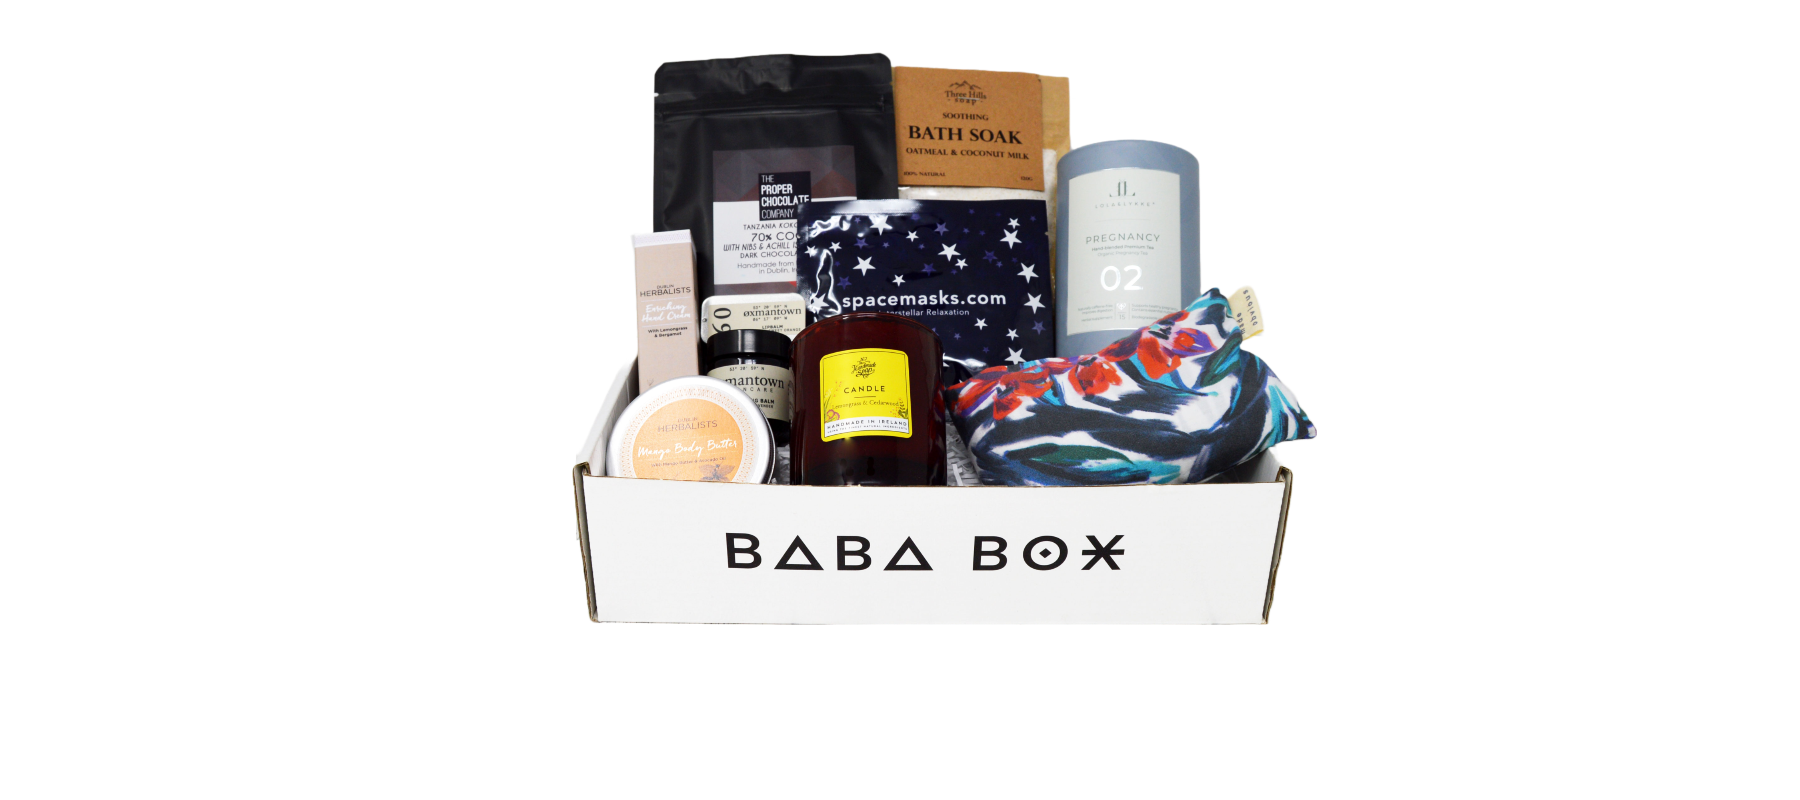 Baba Box - Gifts For New Mums & Babies